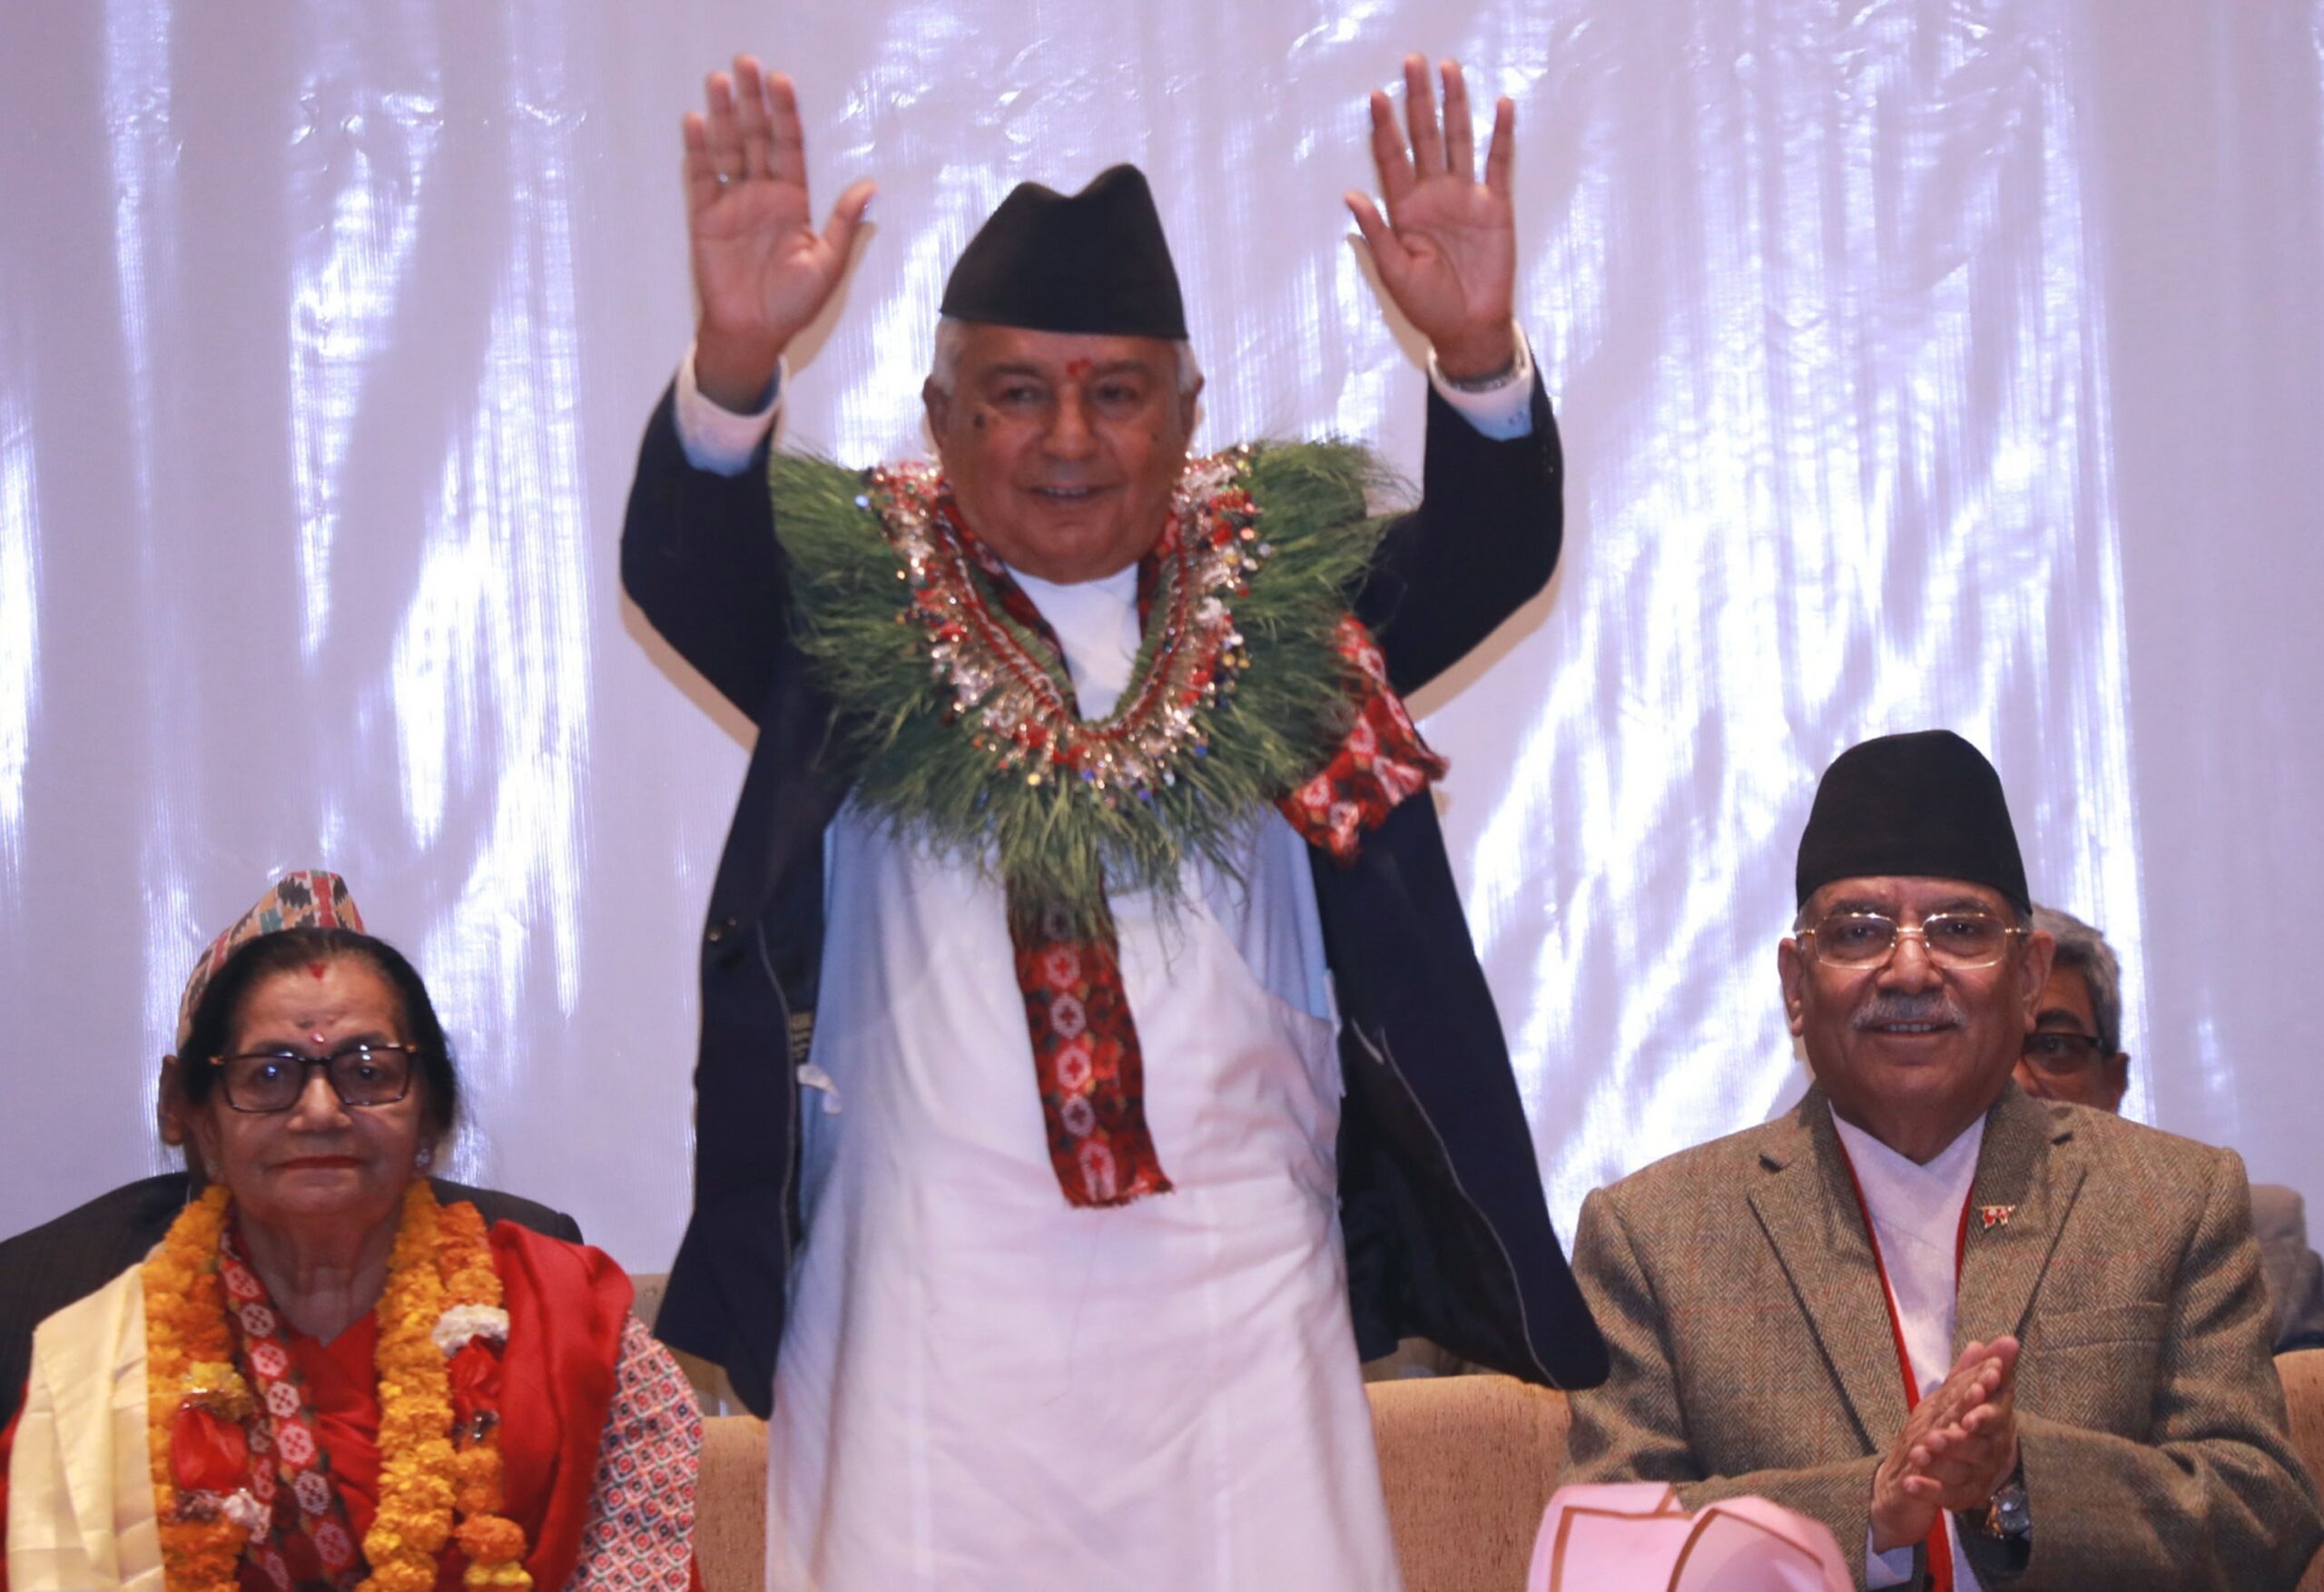 President Paudel calls for economic self-sufficiency in New Year message